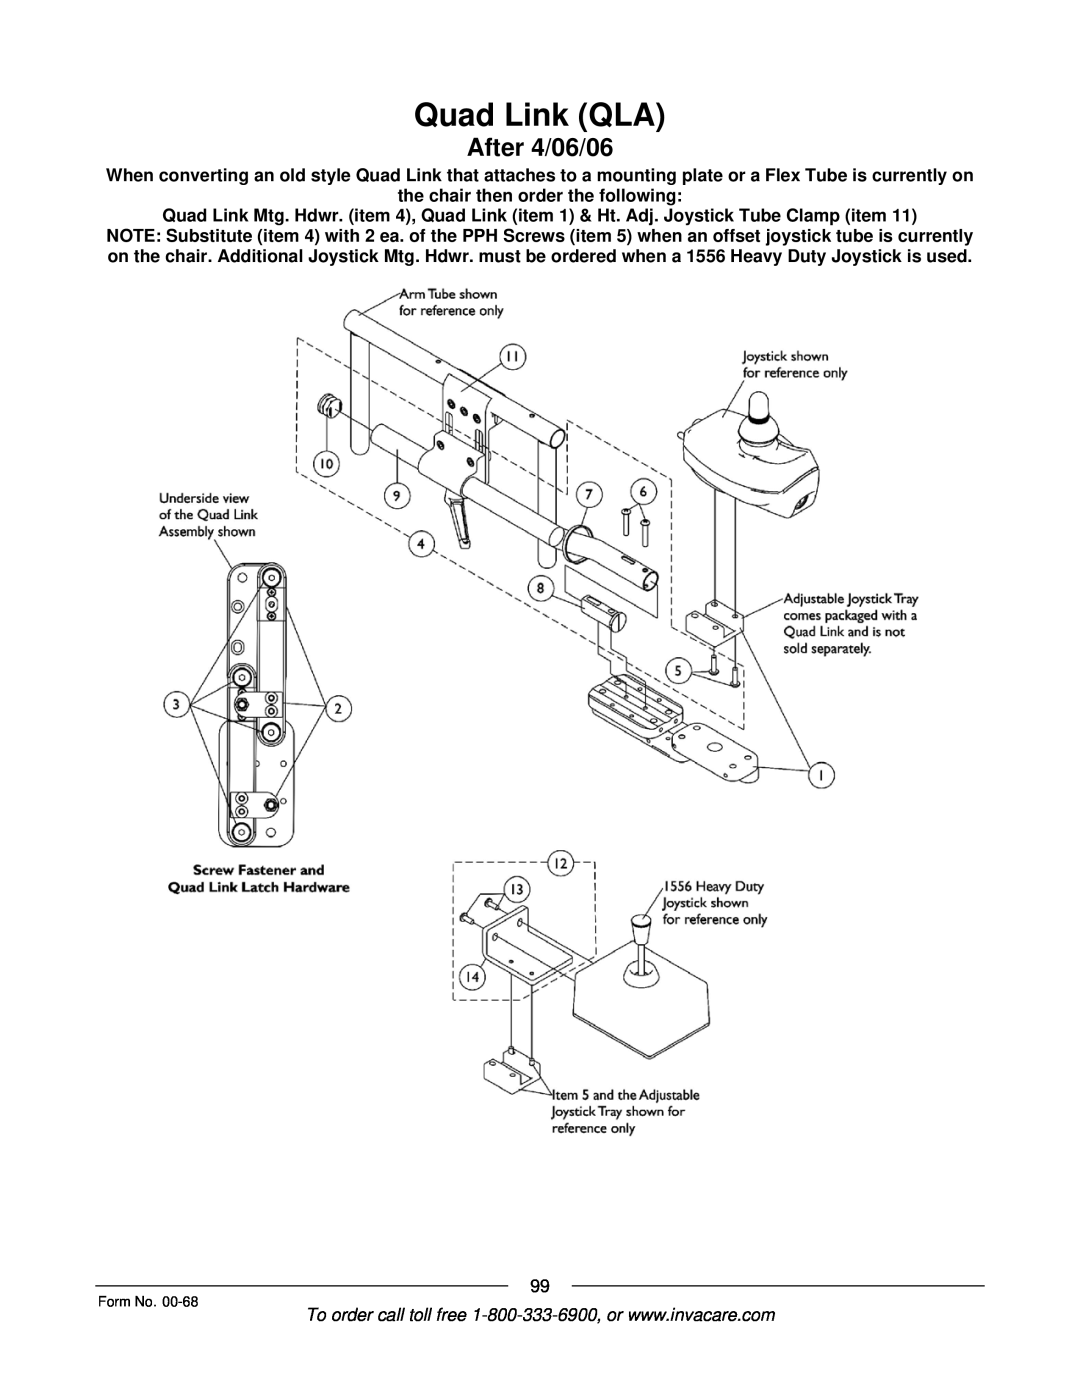 Invacare R2TM manual Quad Link QLA, After 4/06/06, the chair then order the following 